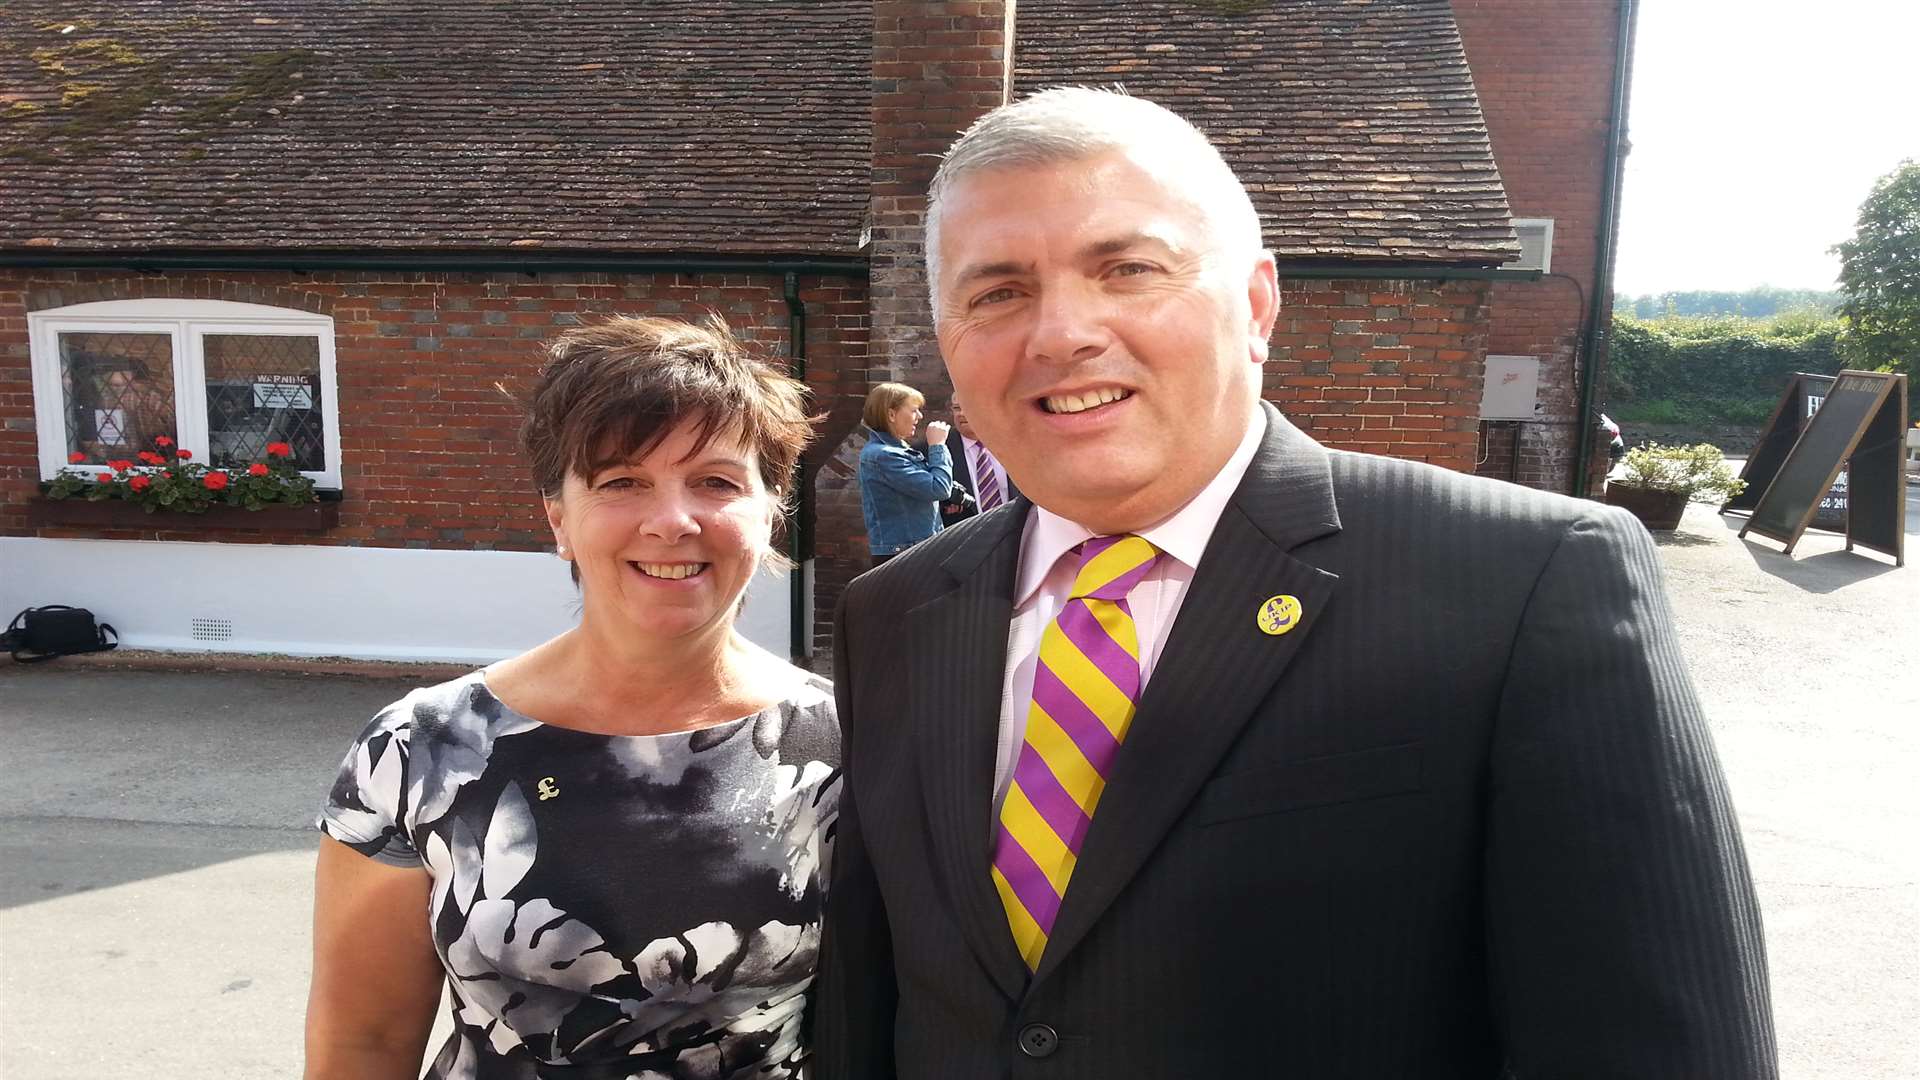 UKIP candidate Eddie Powell with his partner of 13 years, Lorraine Dean